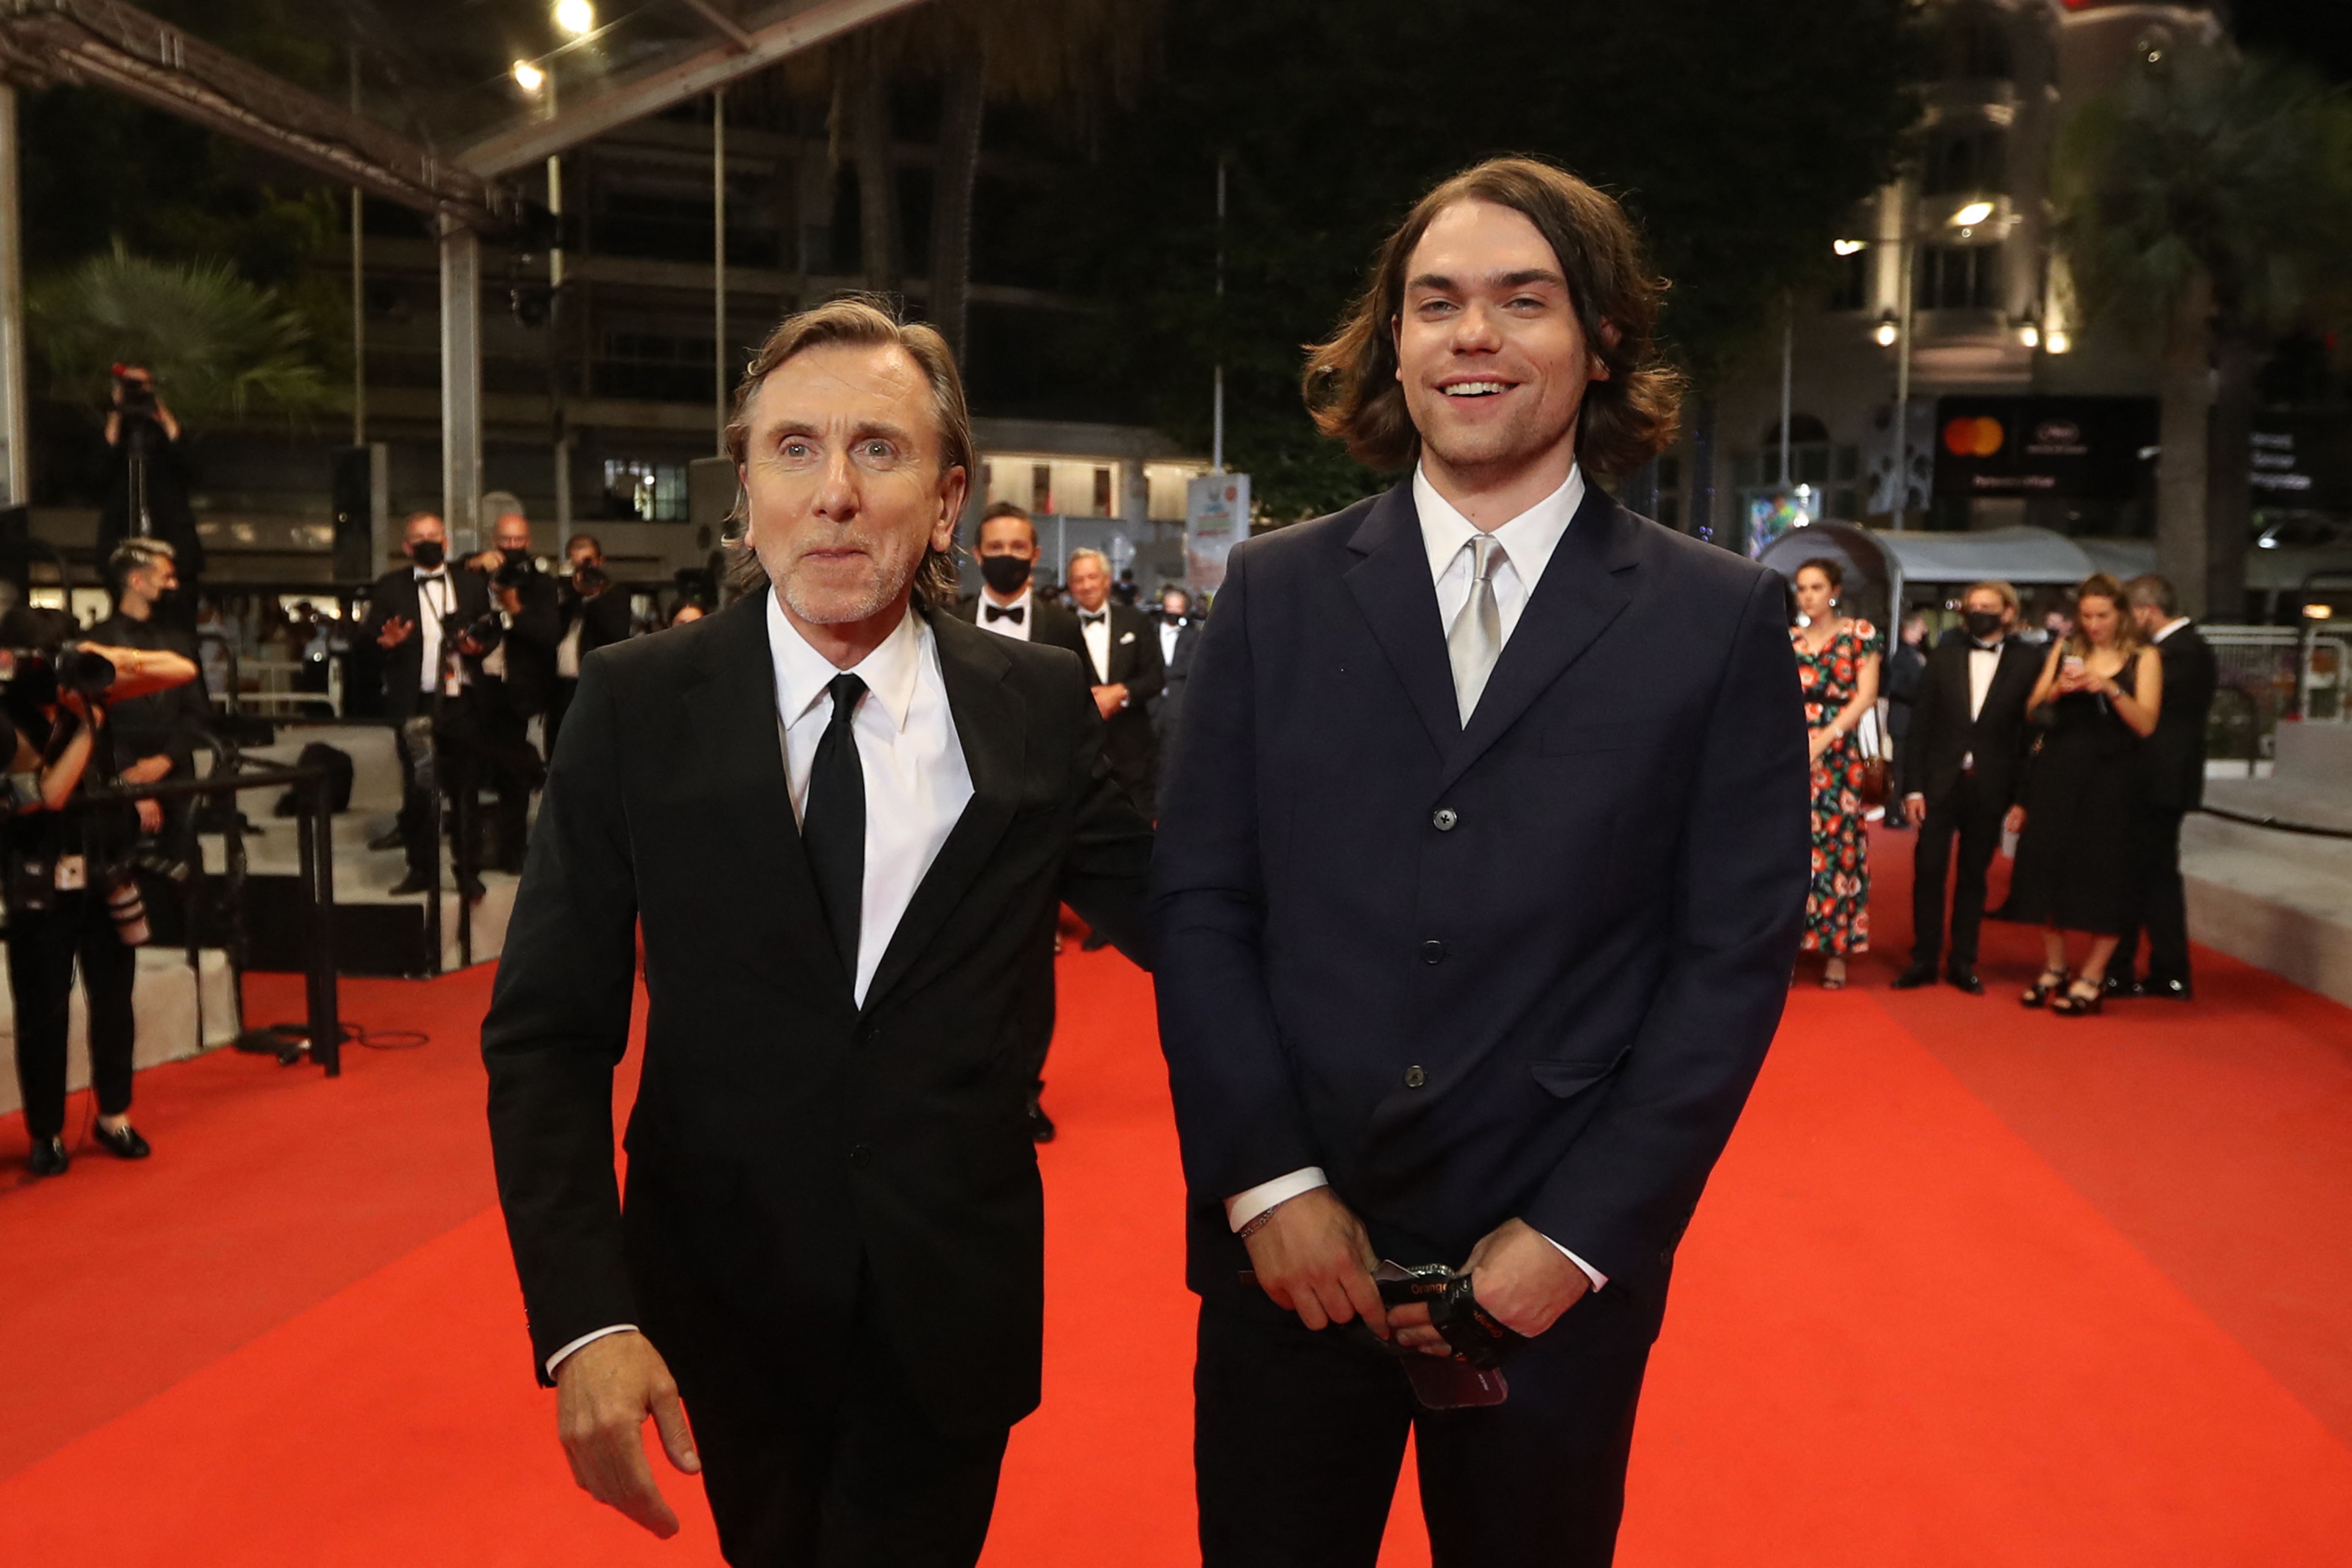 Tim Roth arrives with his son Michael Cormac Roth for the screening of the film "Bergman Island" at the 74th edition of the Cannes Film Festival in Cannes, southern France, on July 11, 2021 | Source: Getty Imageas